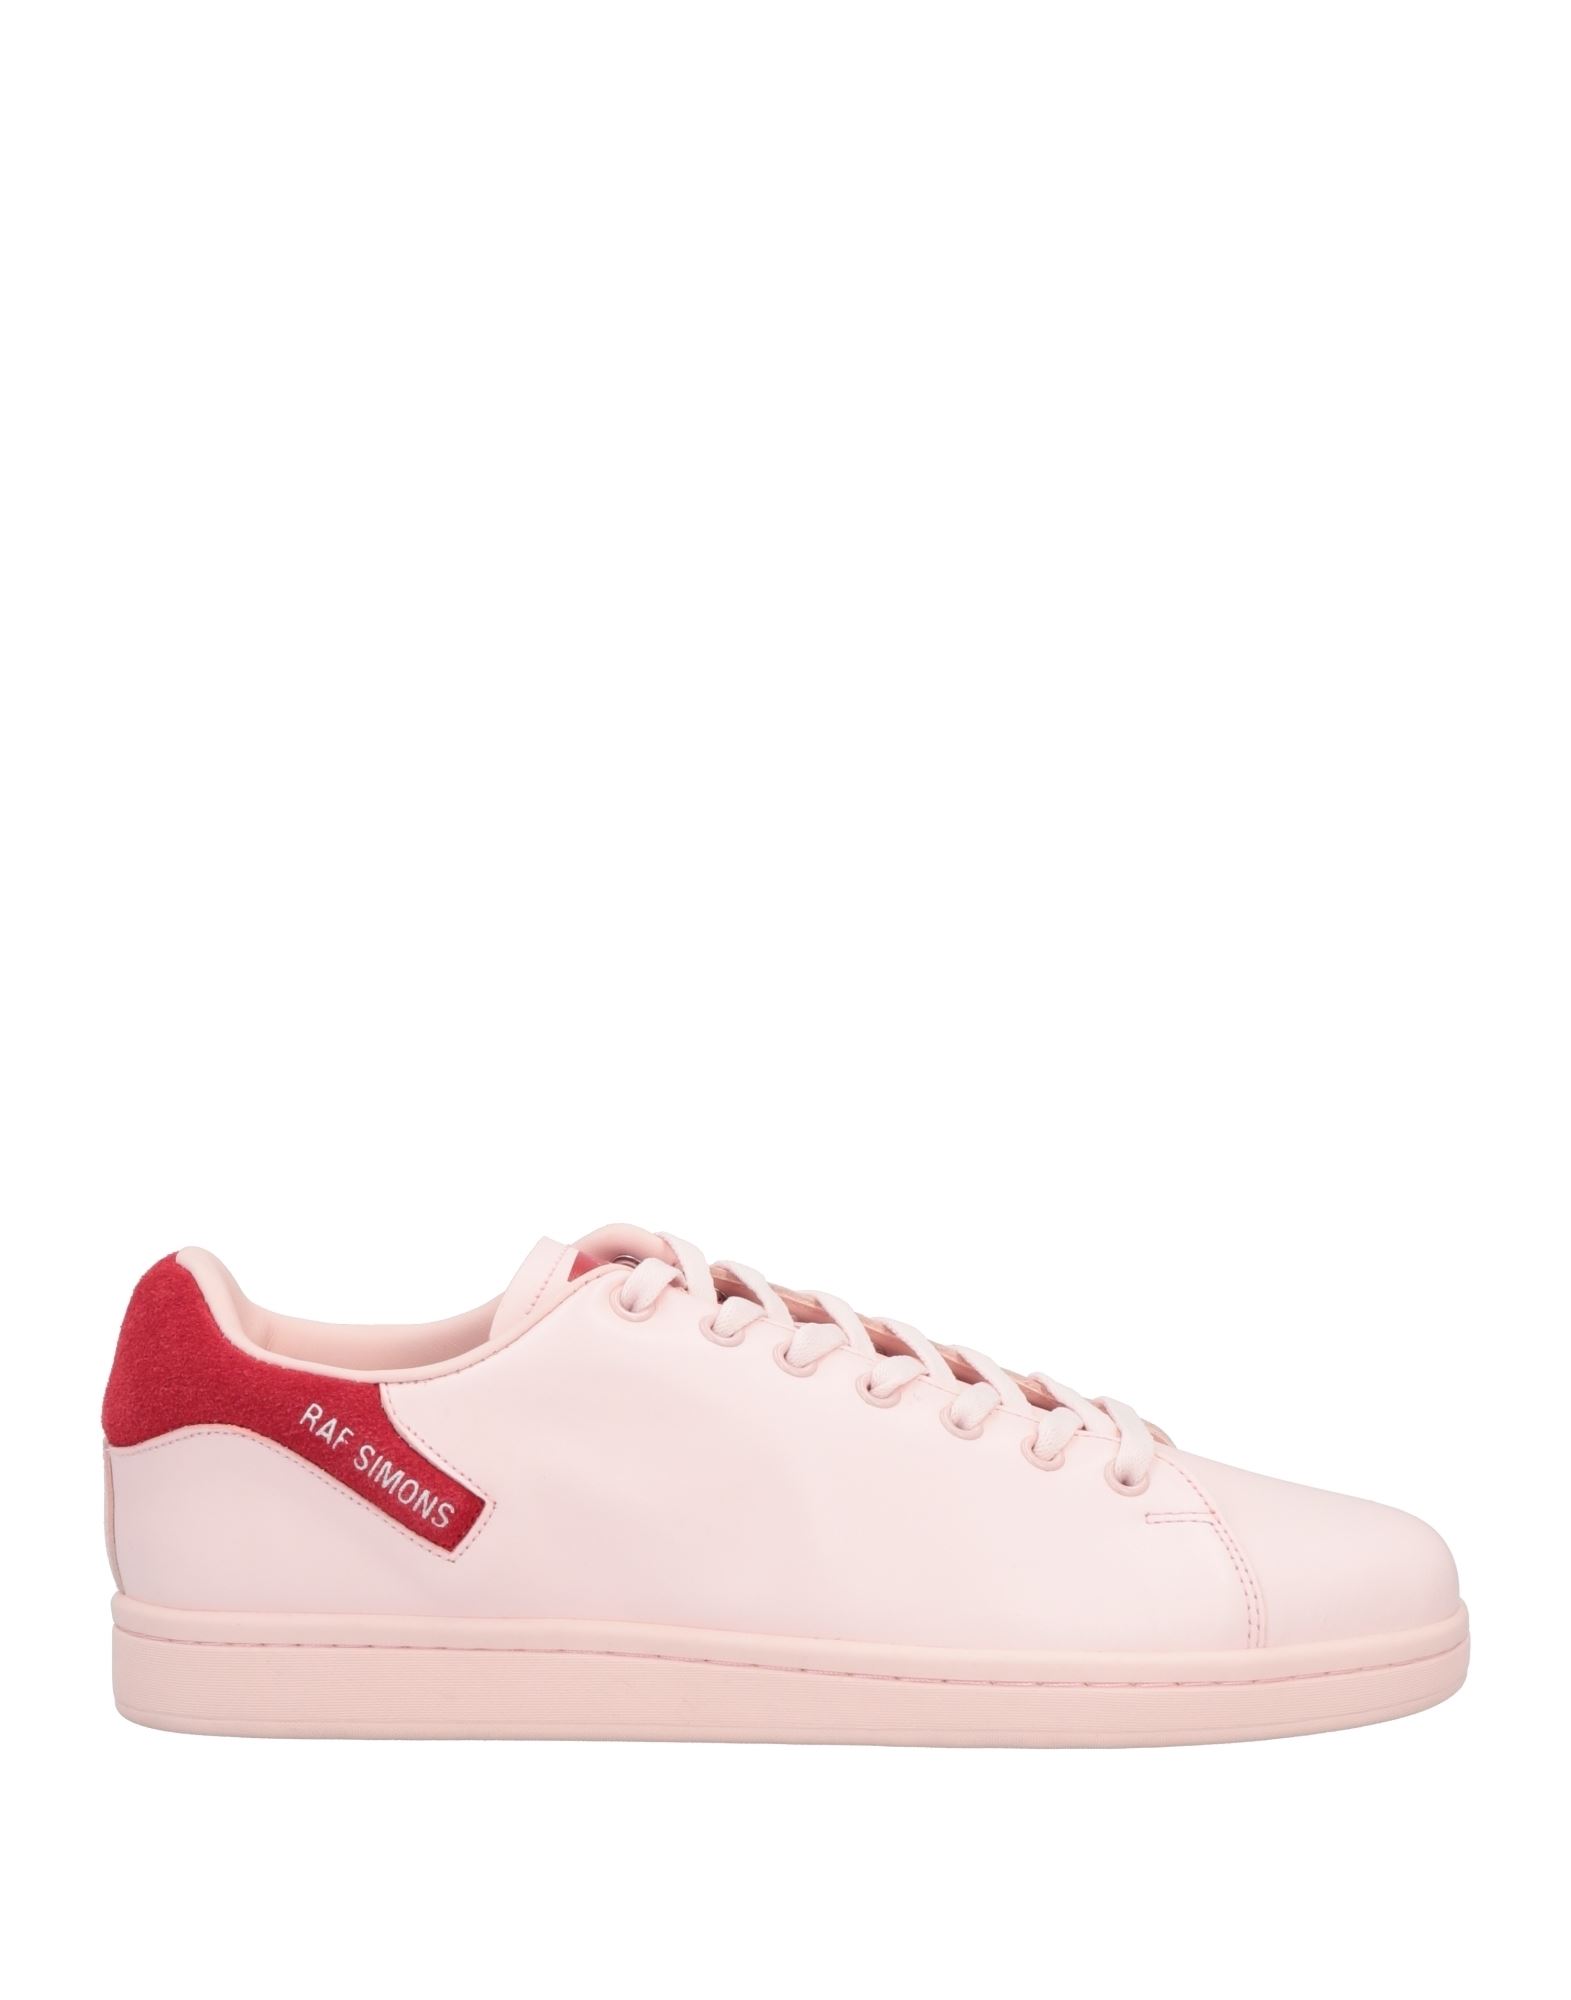 Shop Raf Simons Man Sneakers Light Pink Size 13 Soft Leather